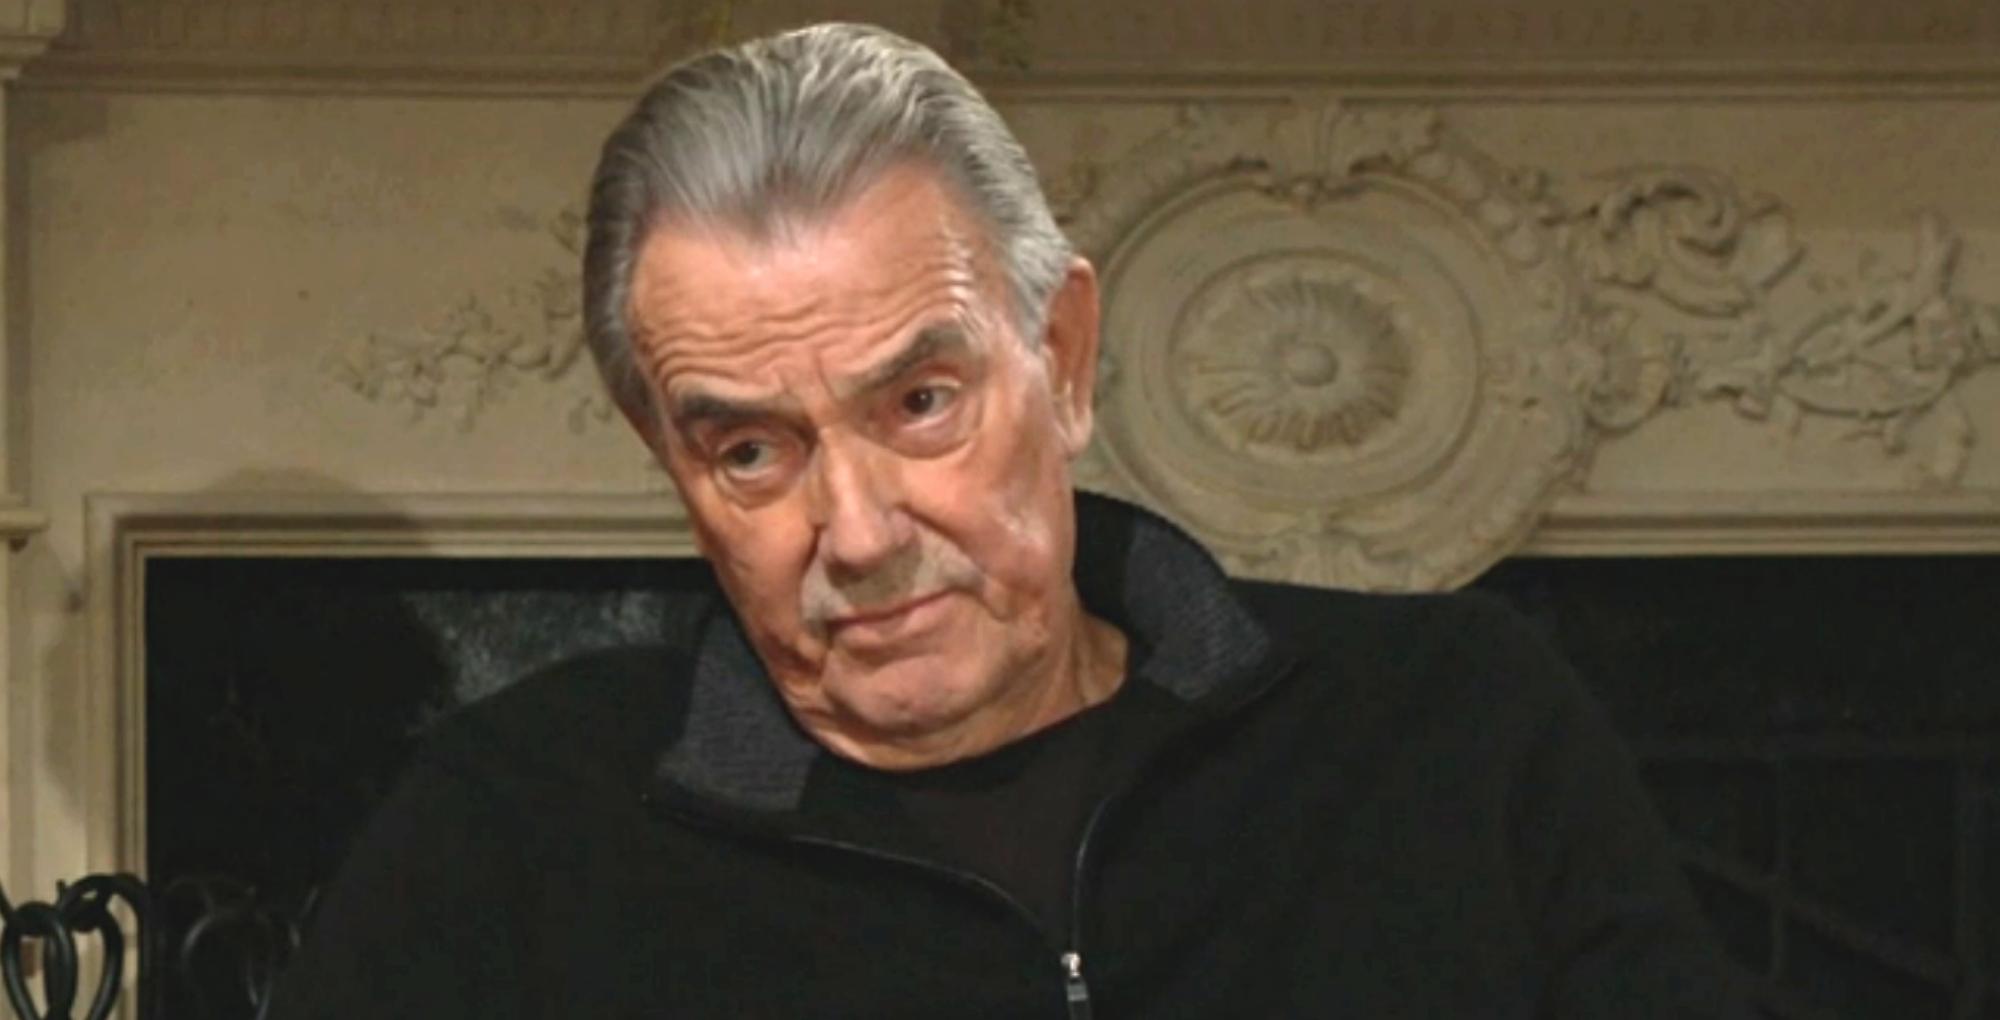 the young and the restless spoilers for april 6, 2023 have victor newman joining forces with someone